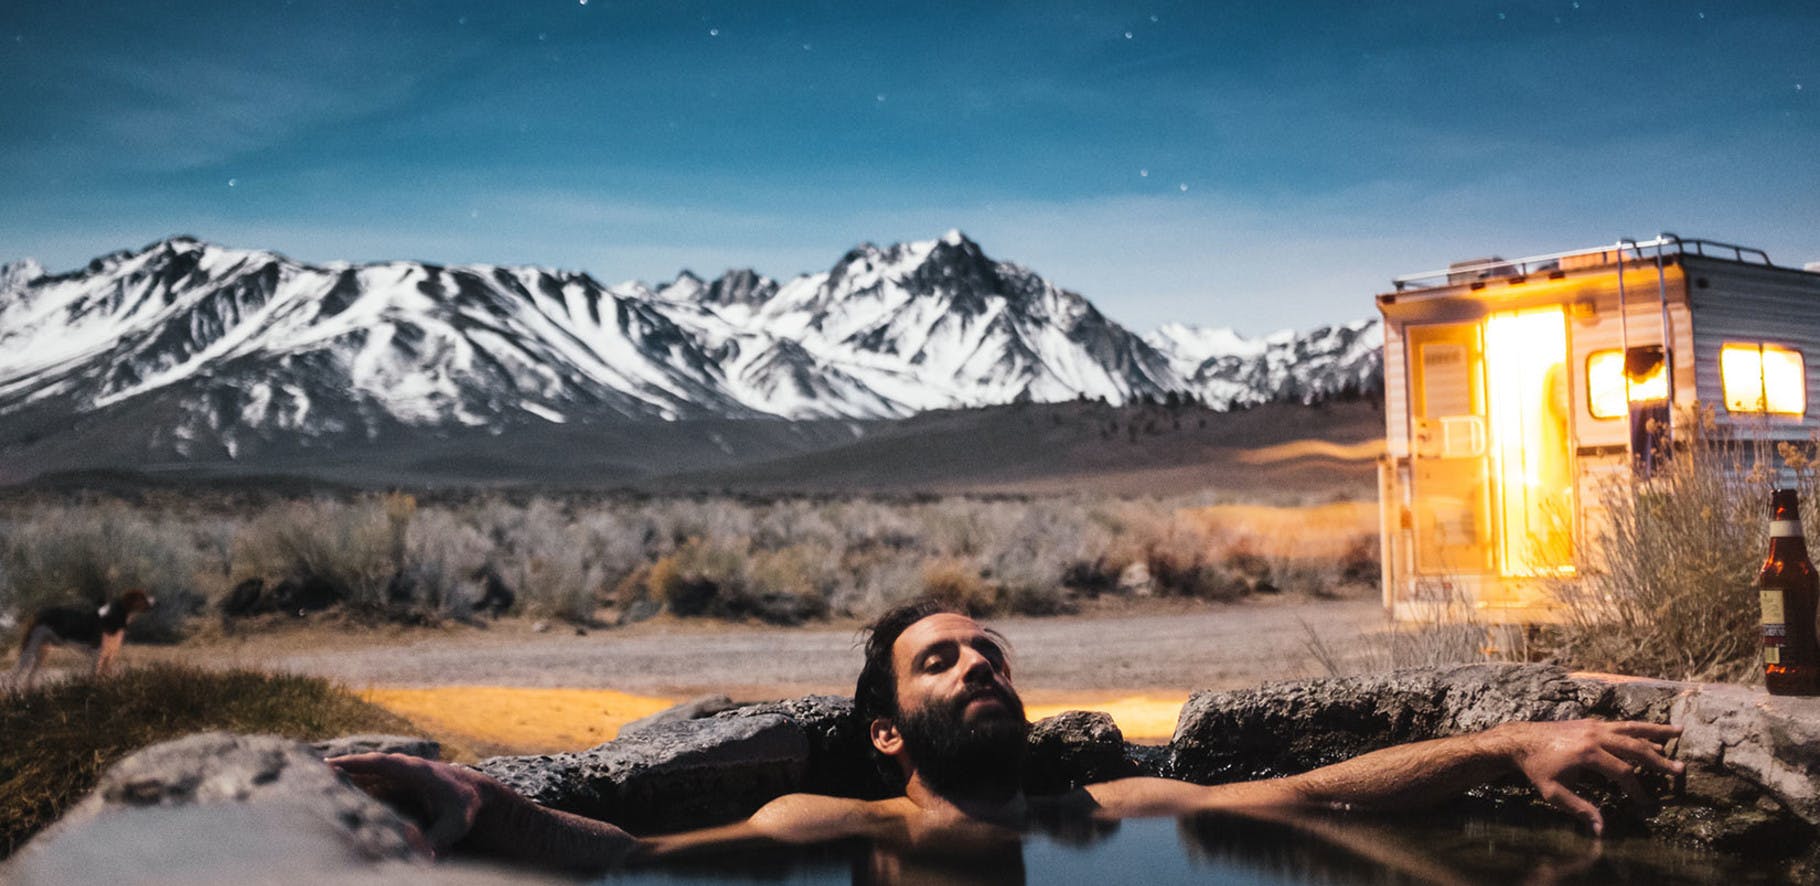 Man relaxing in an natural hot spring with his camper and a mountain range in the background